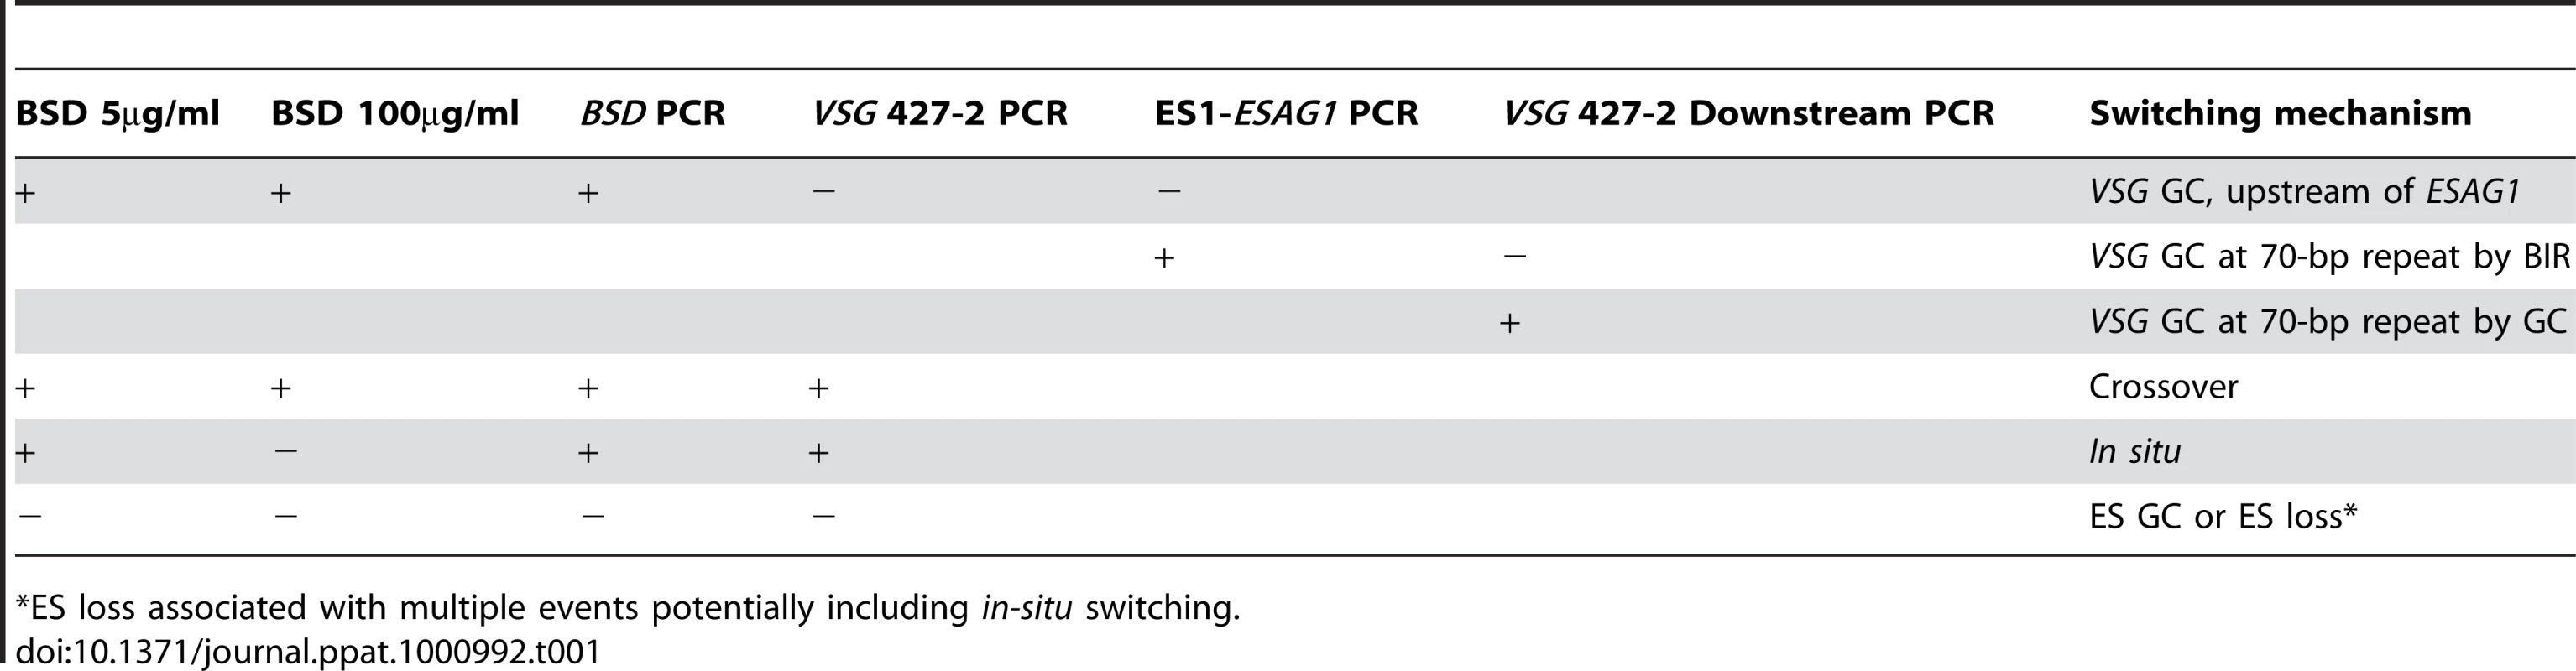 Strategies to score switching mechanisms by blasticidin sensitivity and PCR.